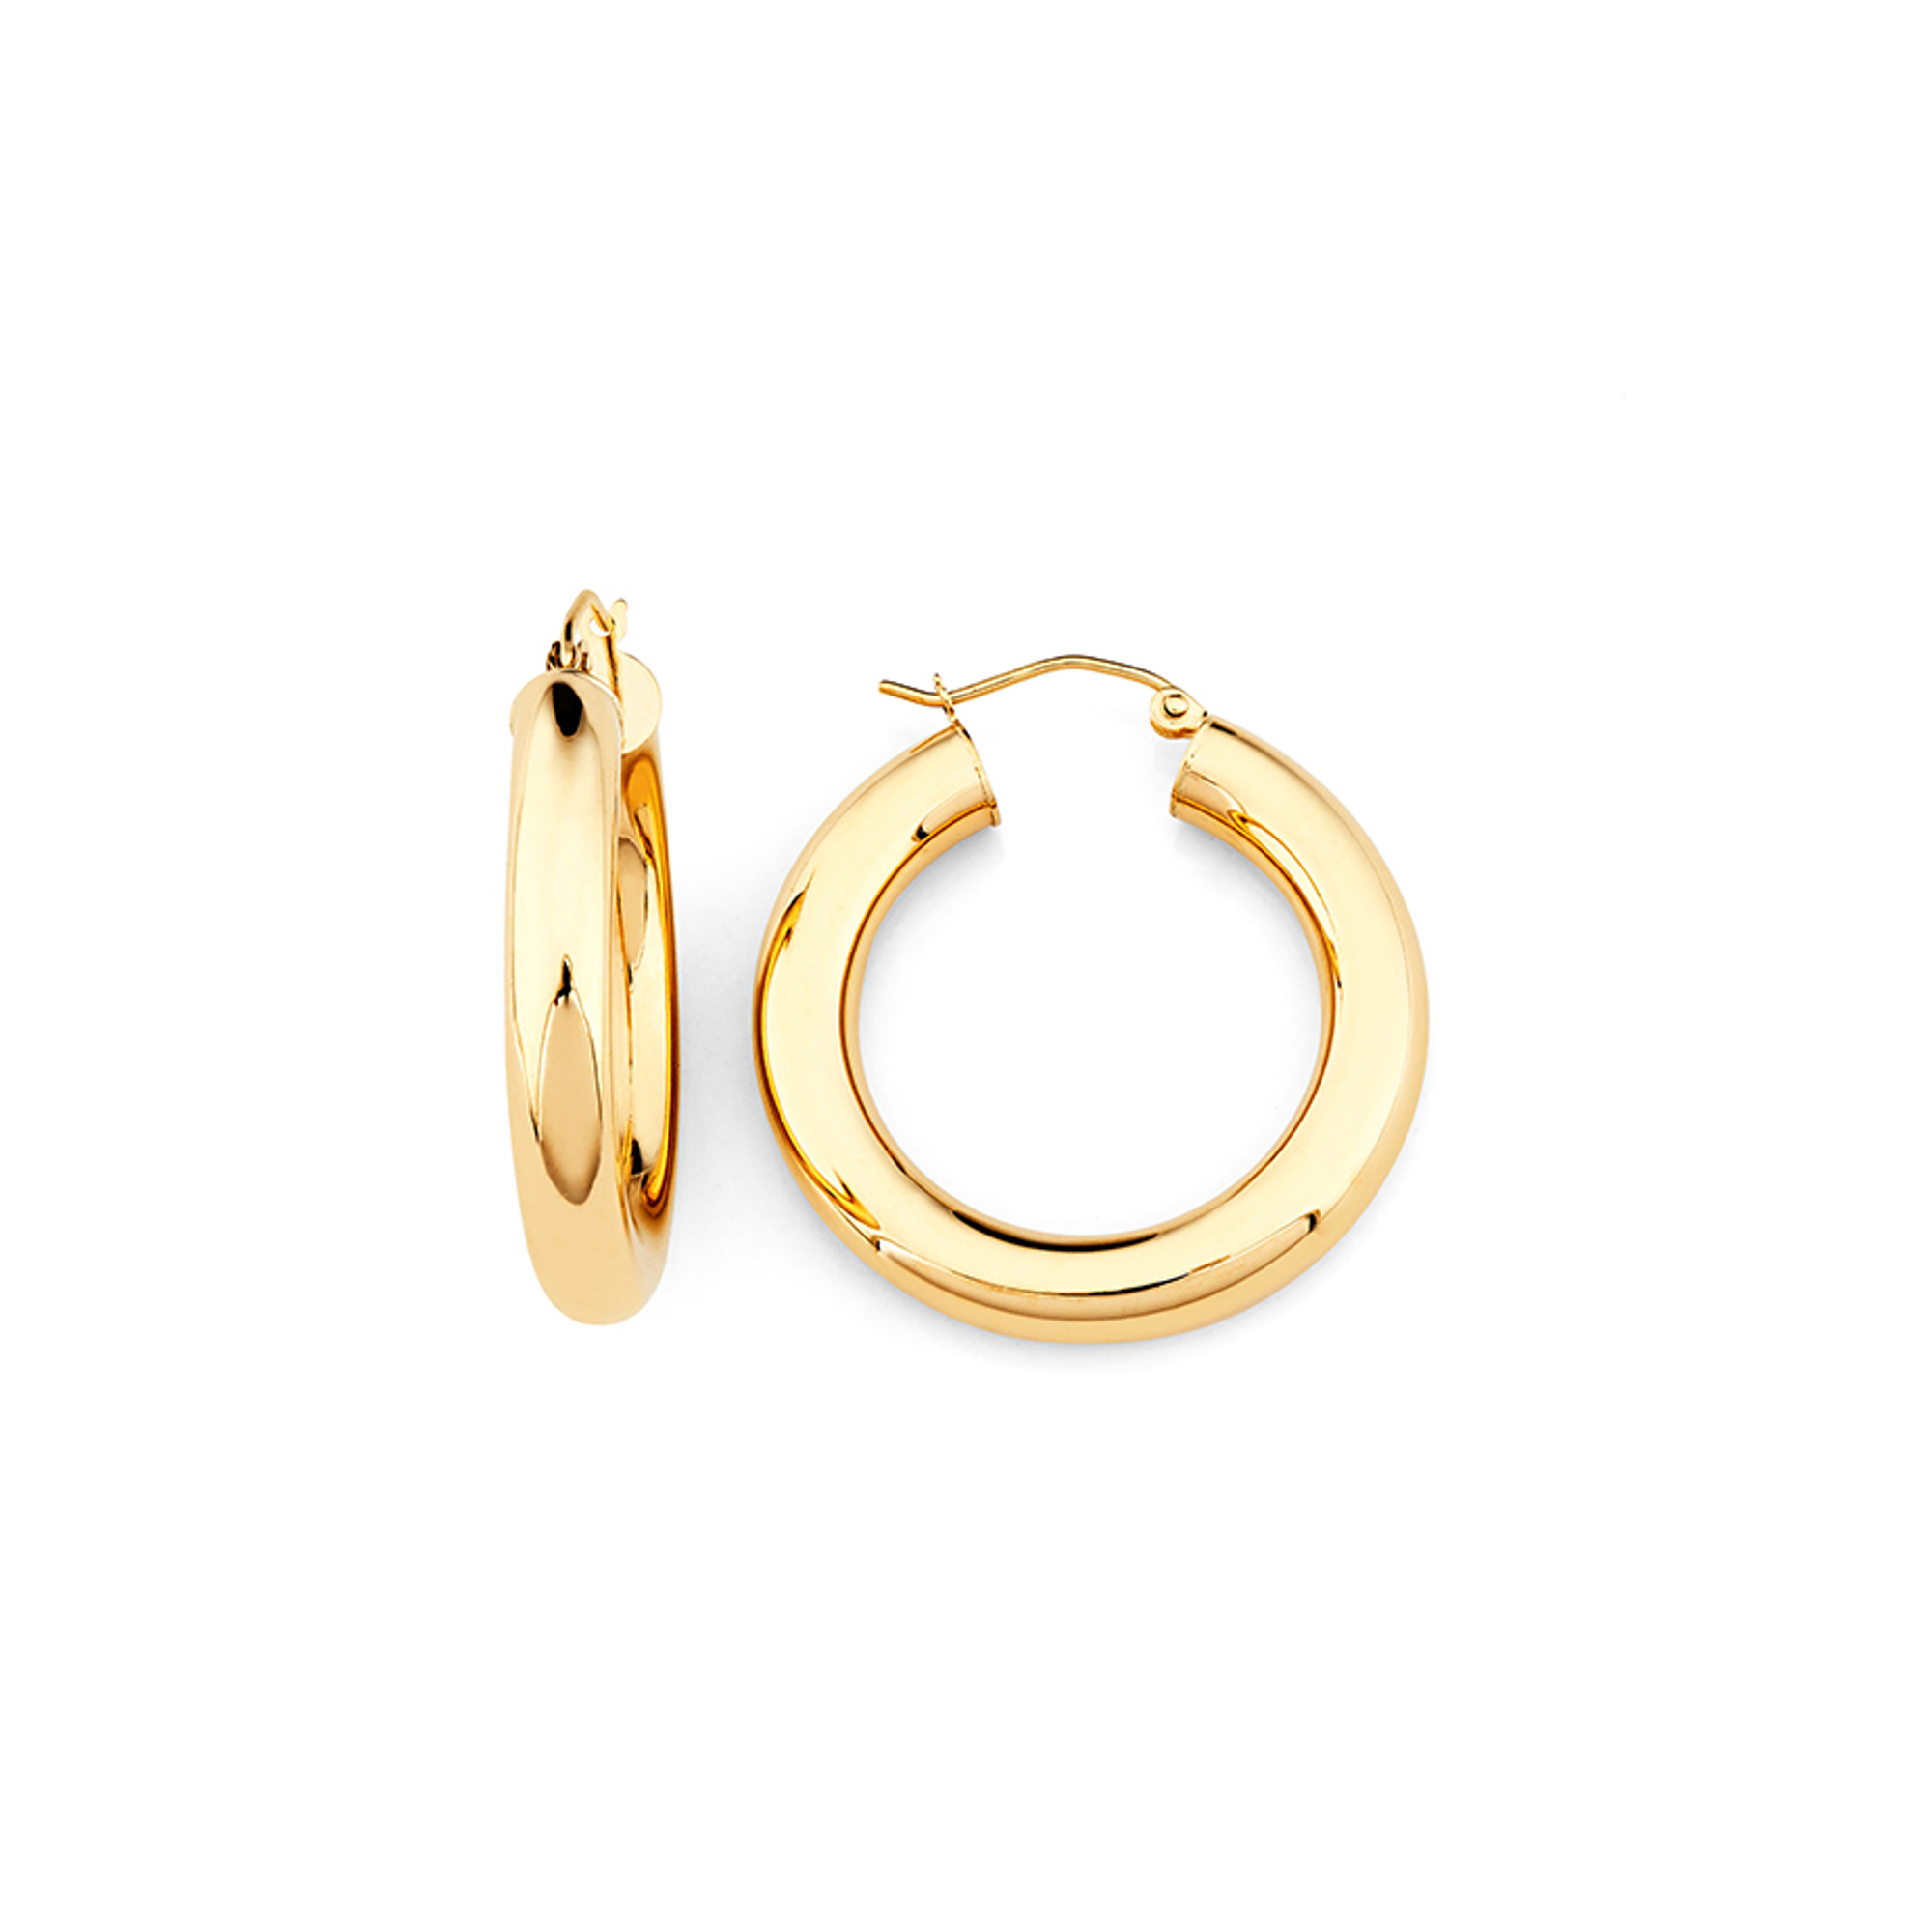 14K Yellow Gold 5 Mm By 30Mm Wide High Polished Hoop Earrings | Sarraf.com